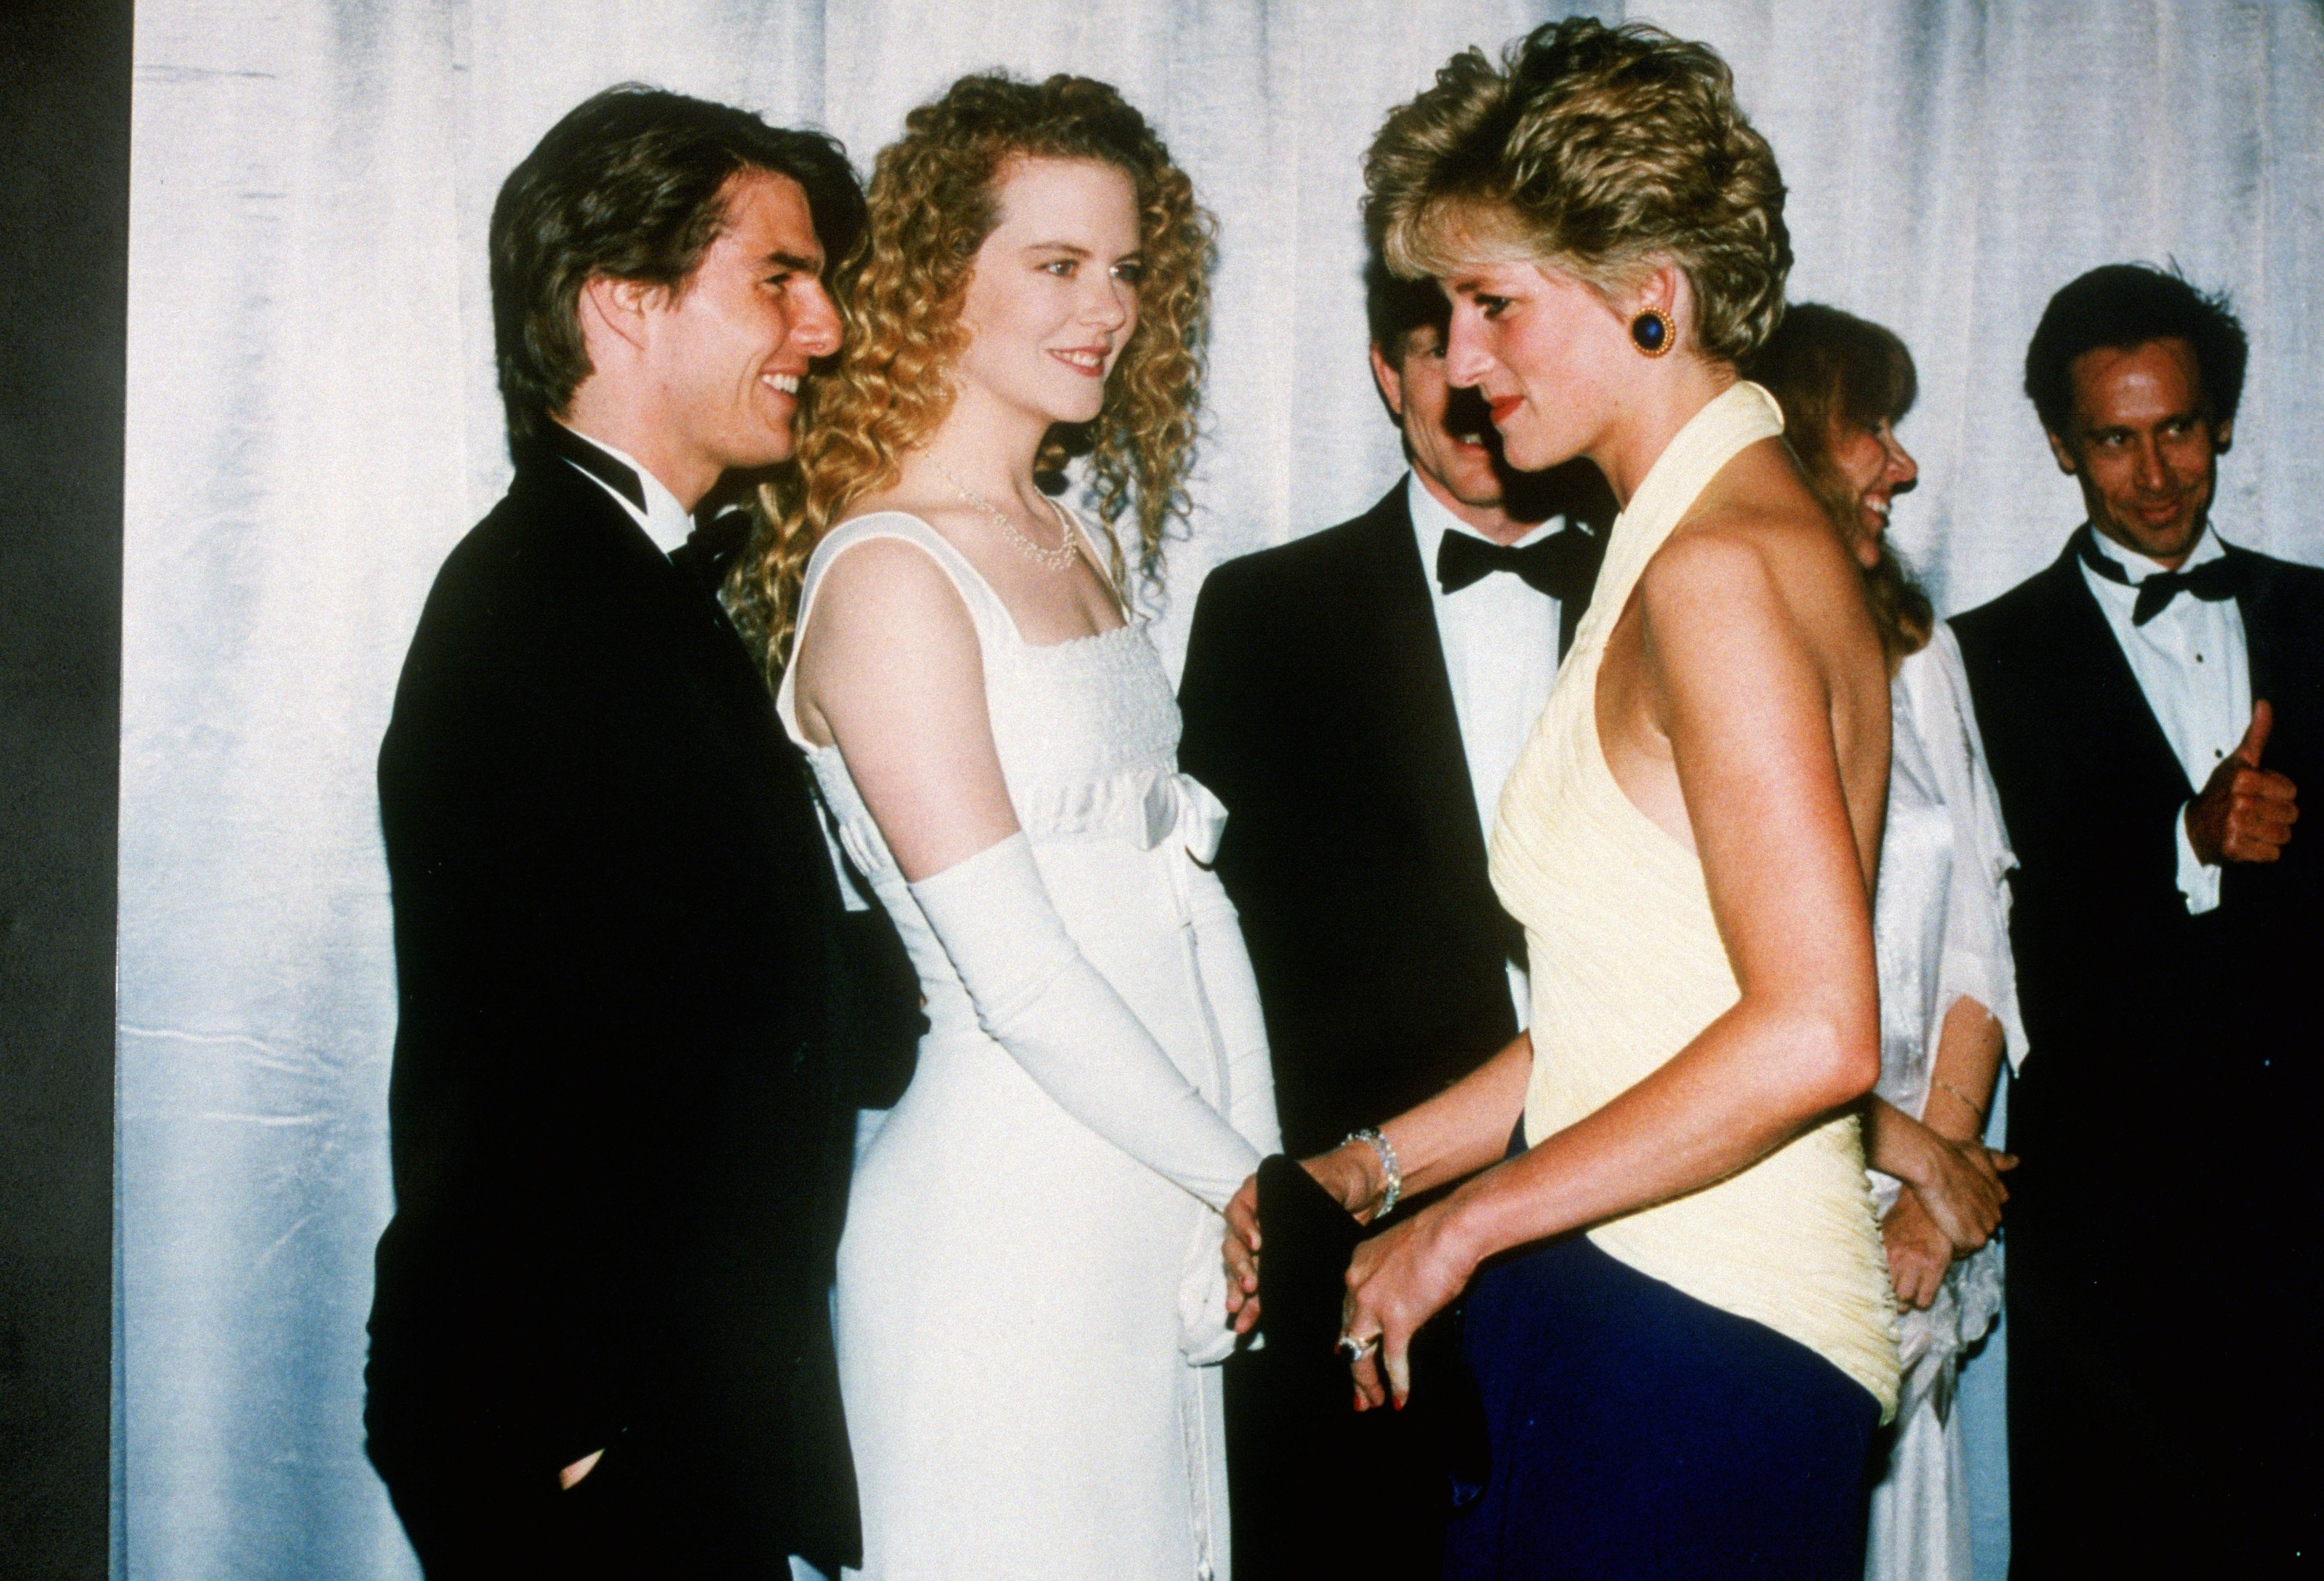 Diana, Princess of Wales meets actors Tom Cruise and Nicole Kidman at the premiere of "Far and Away" at the Leicester Square Empire Cinema  | Source: Getty Images